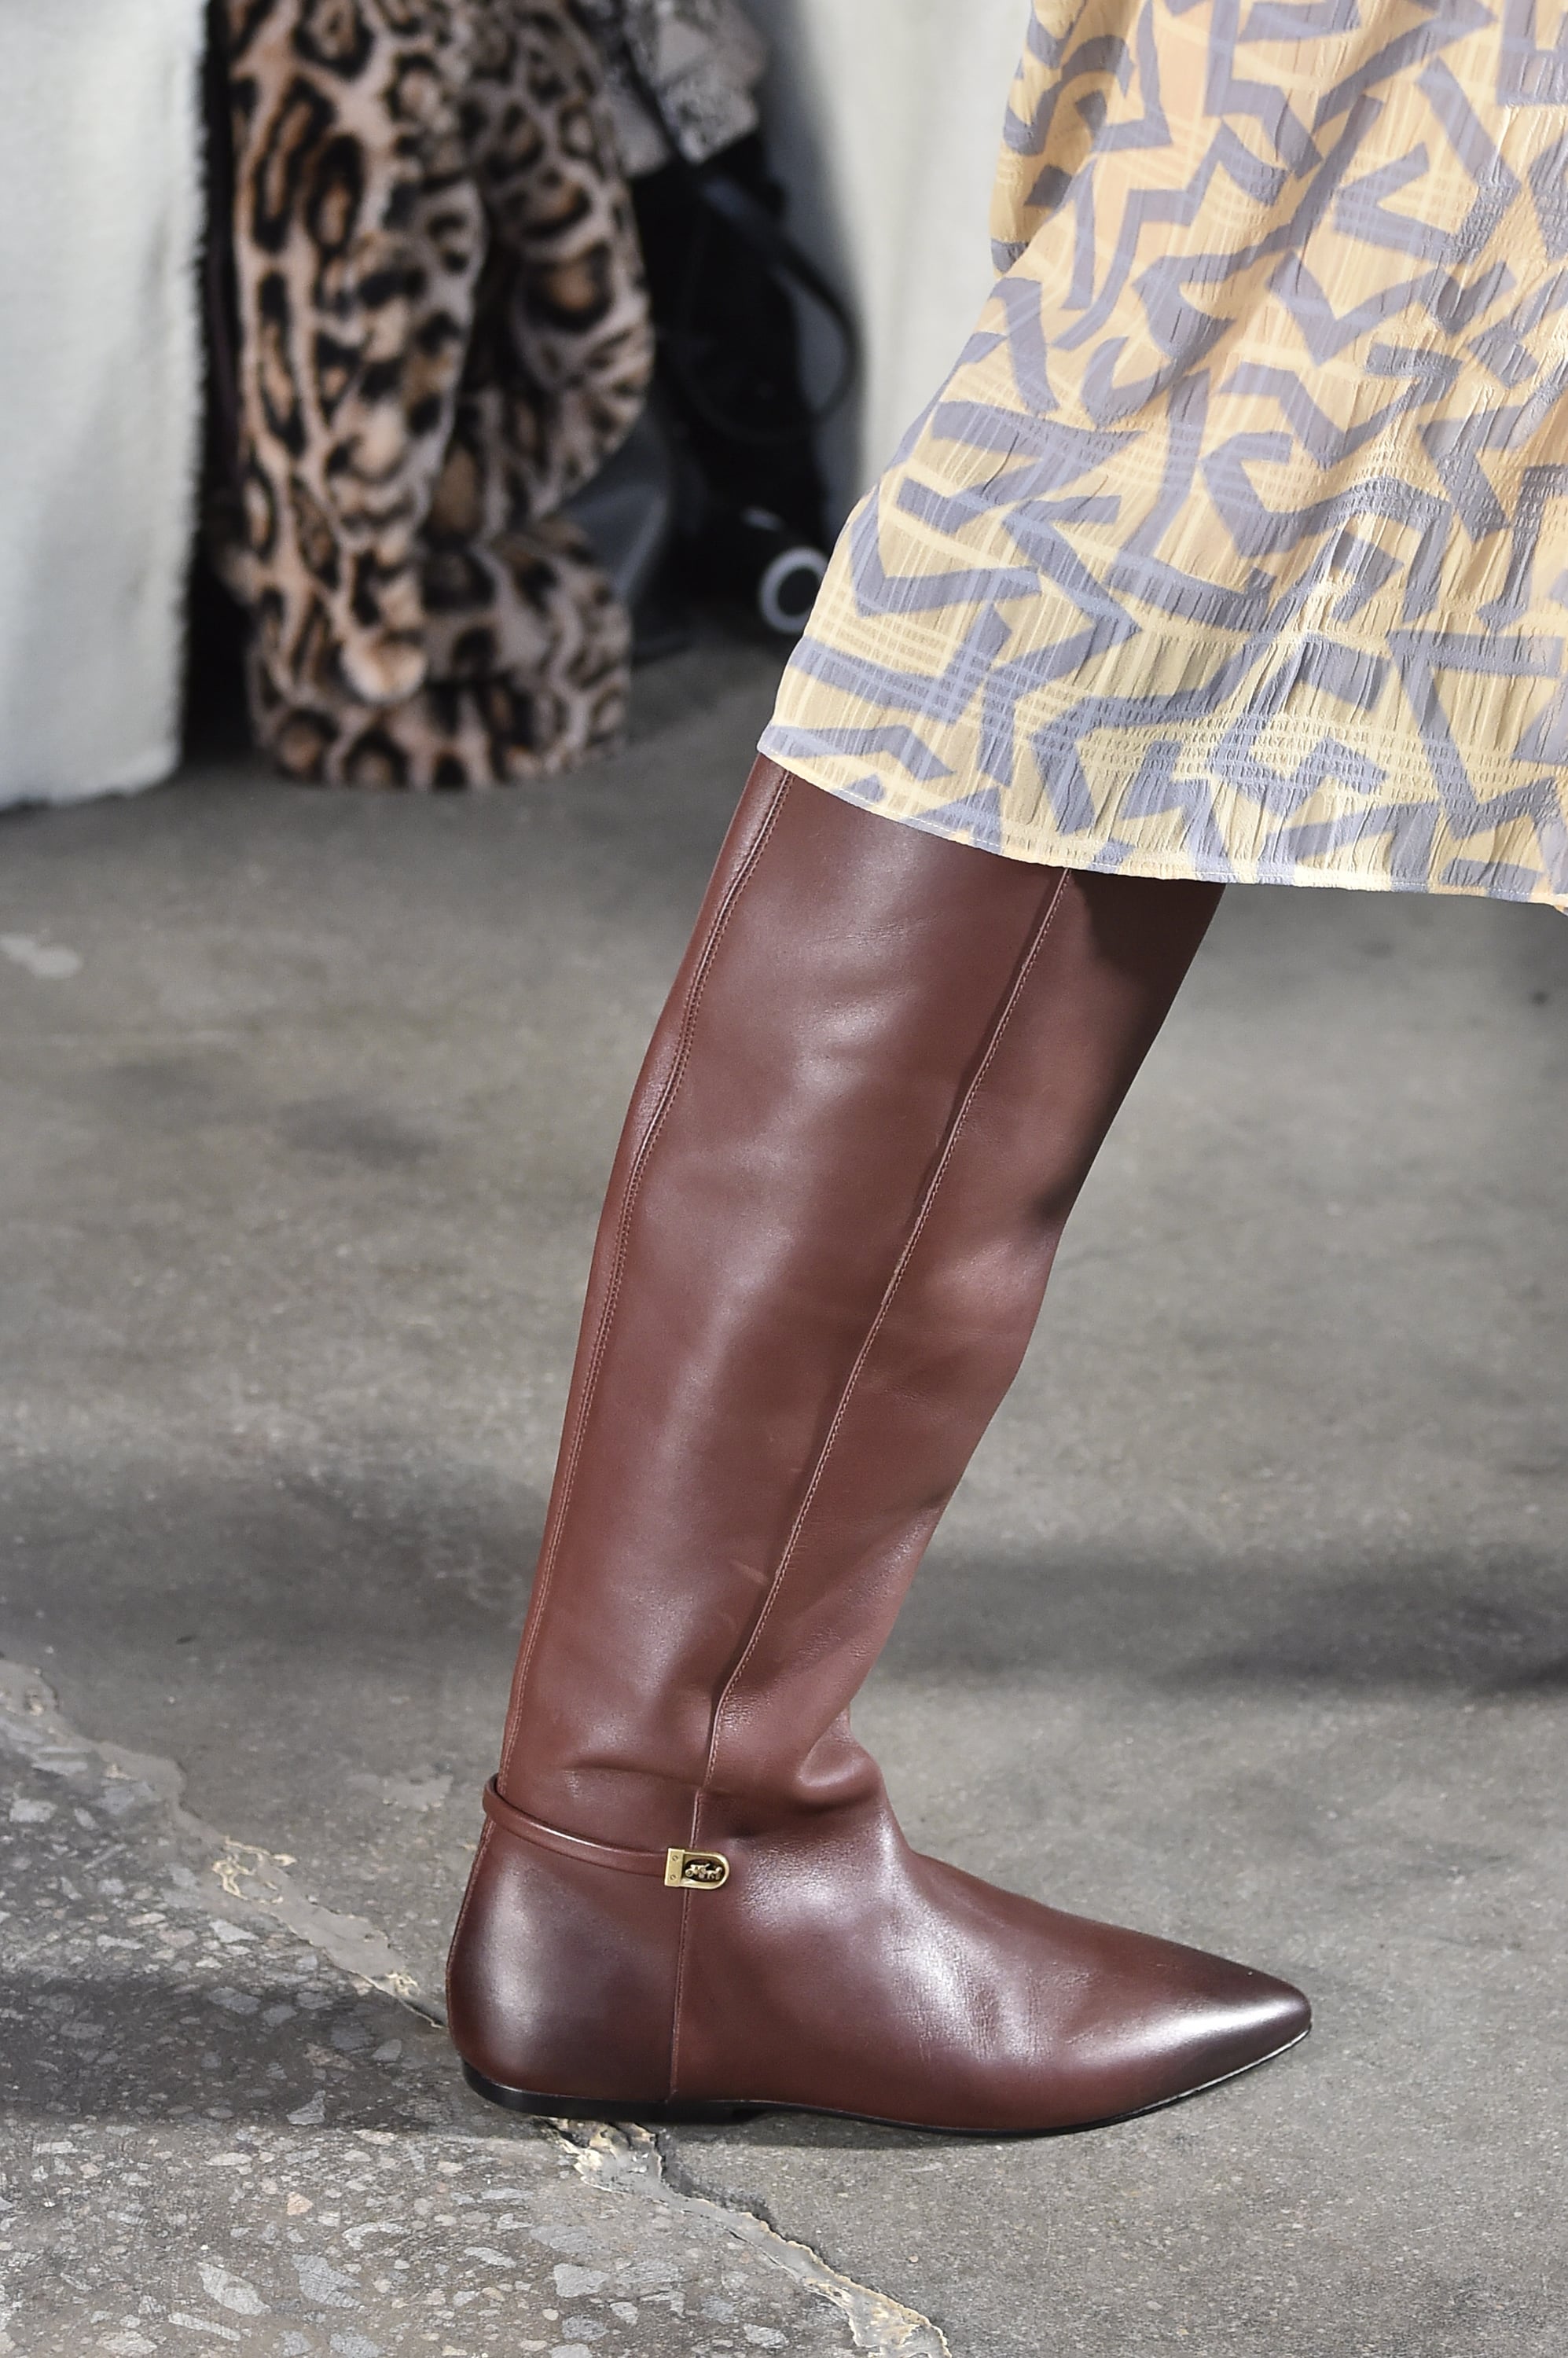 Fall Shoe Trends 2020: Riding Boots | 8 